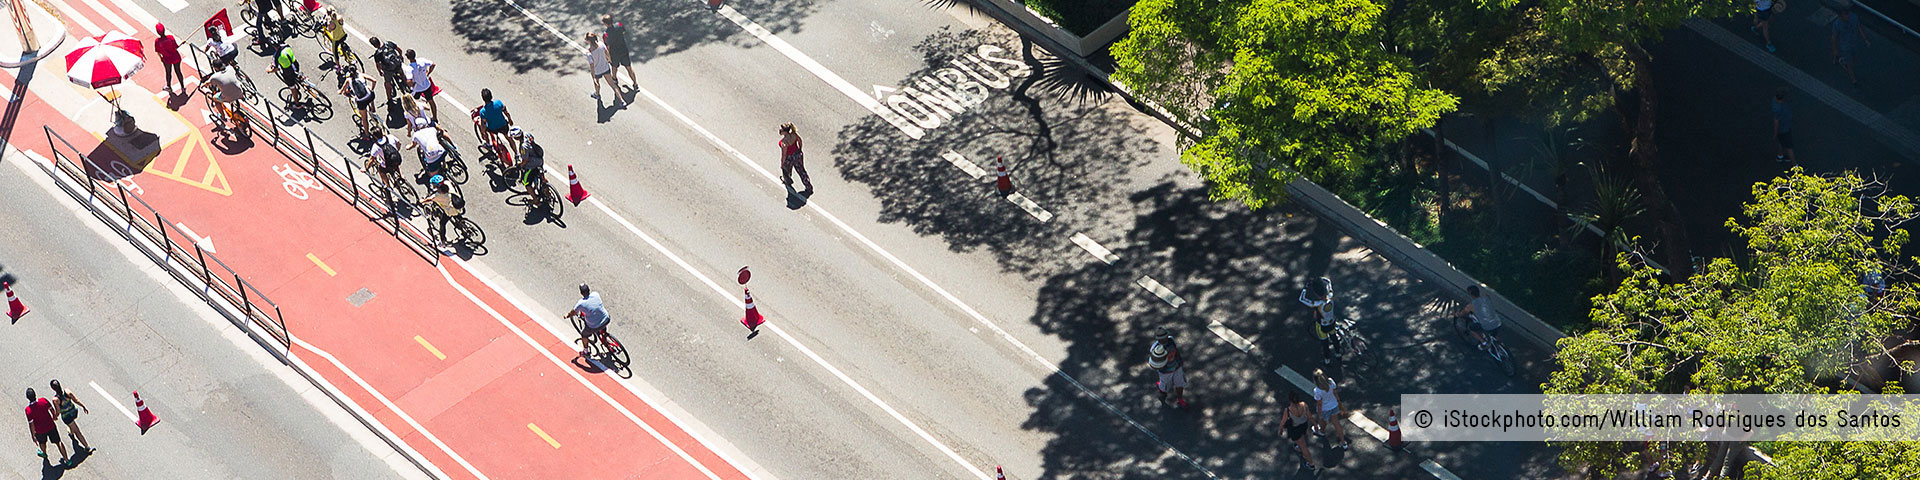 View from above of a road with cycle path marked in red with many people cycling on it. © iStockphoto.com/William Rodrigues dos Santos